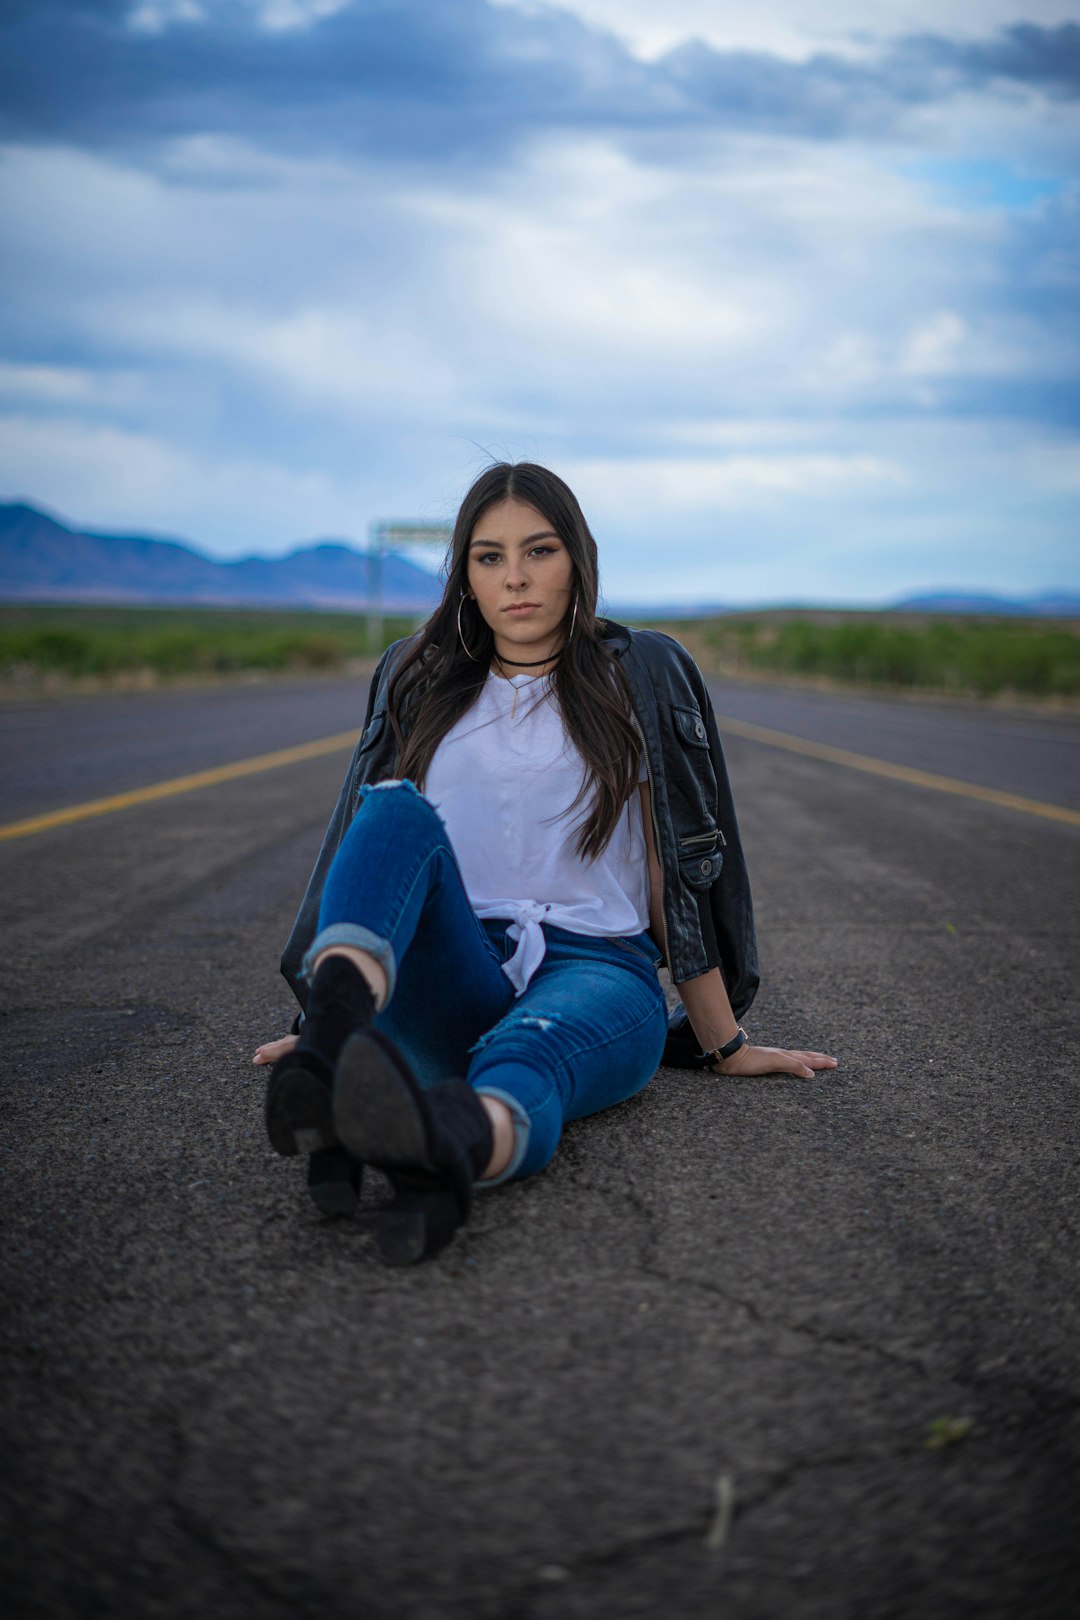 woman in white long sleeve shirt and blue denim jeans sitting on road during daytime